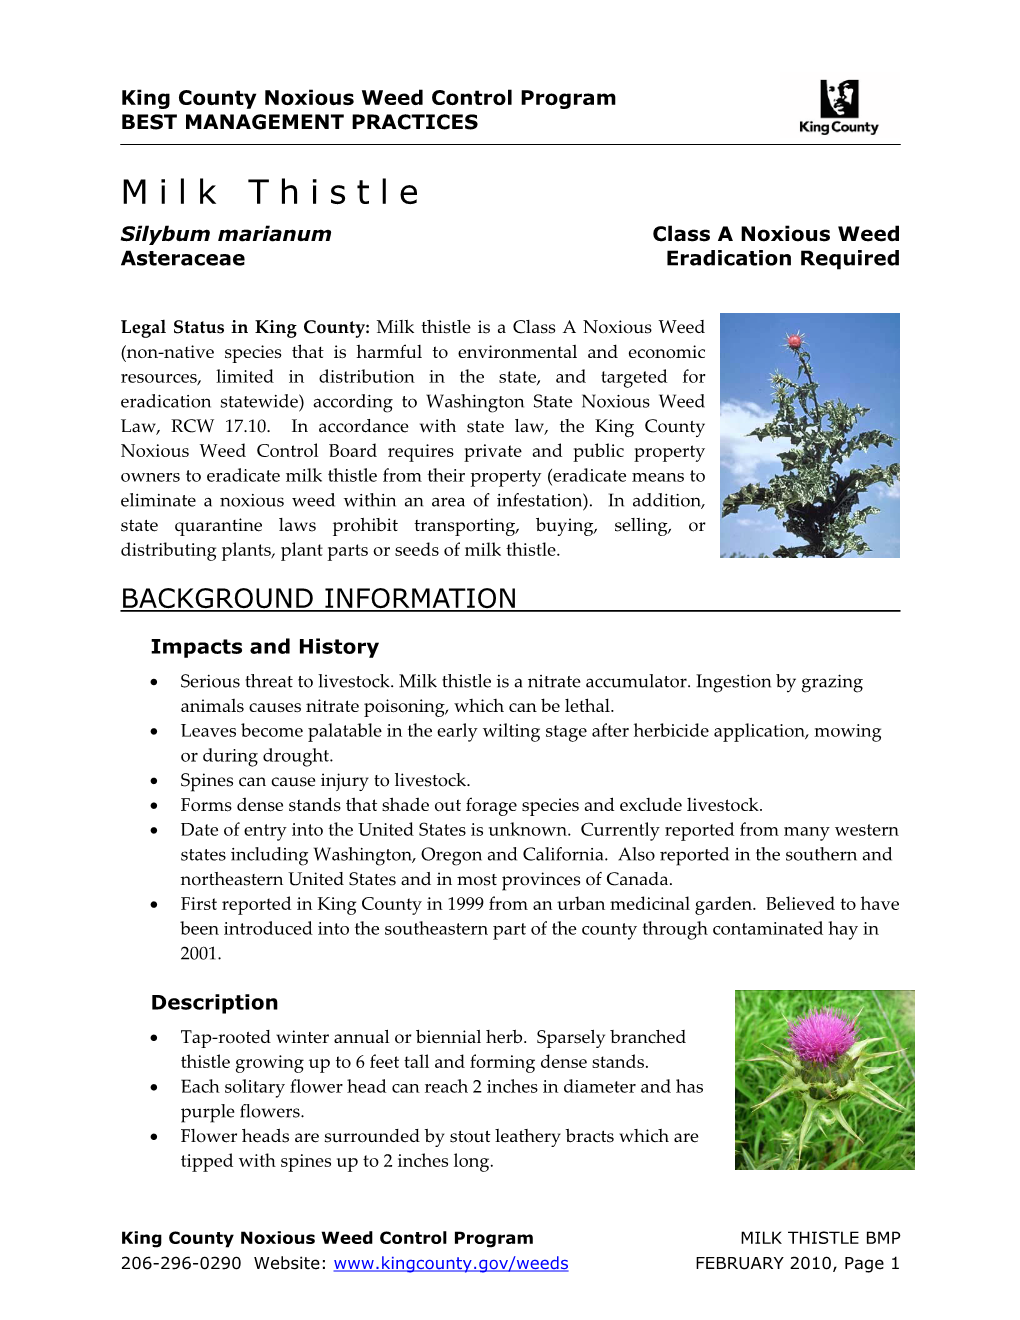 Control Options for Milk Thistle